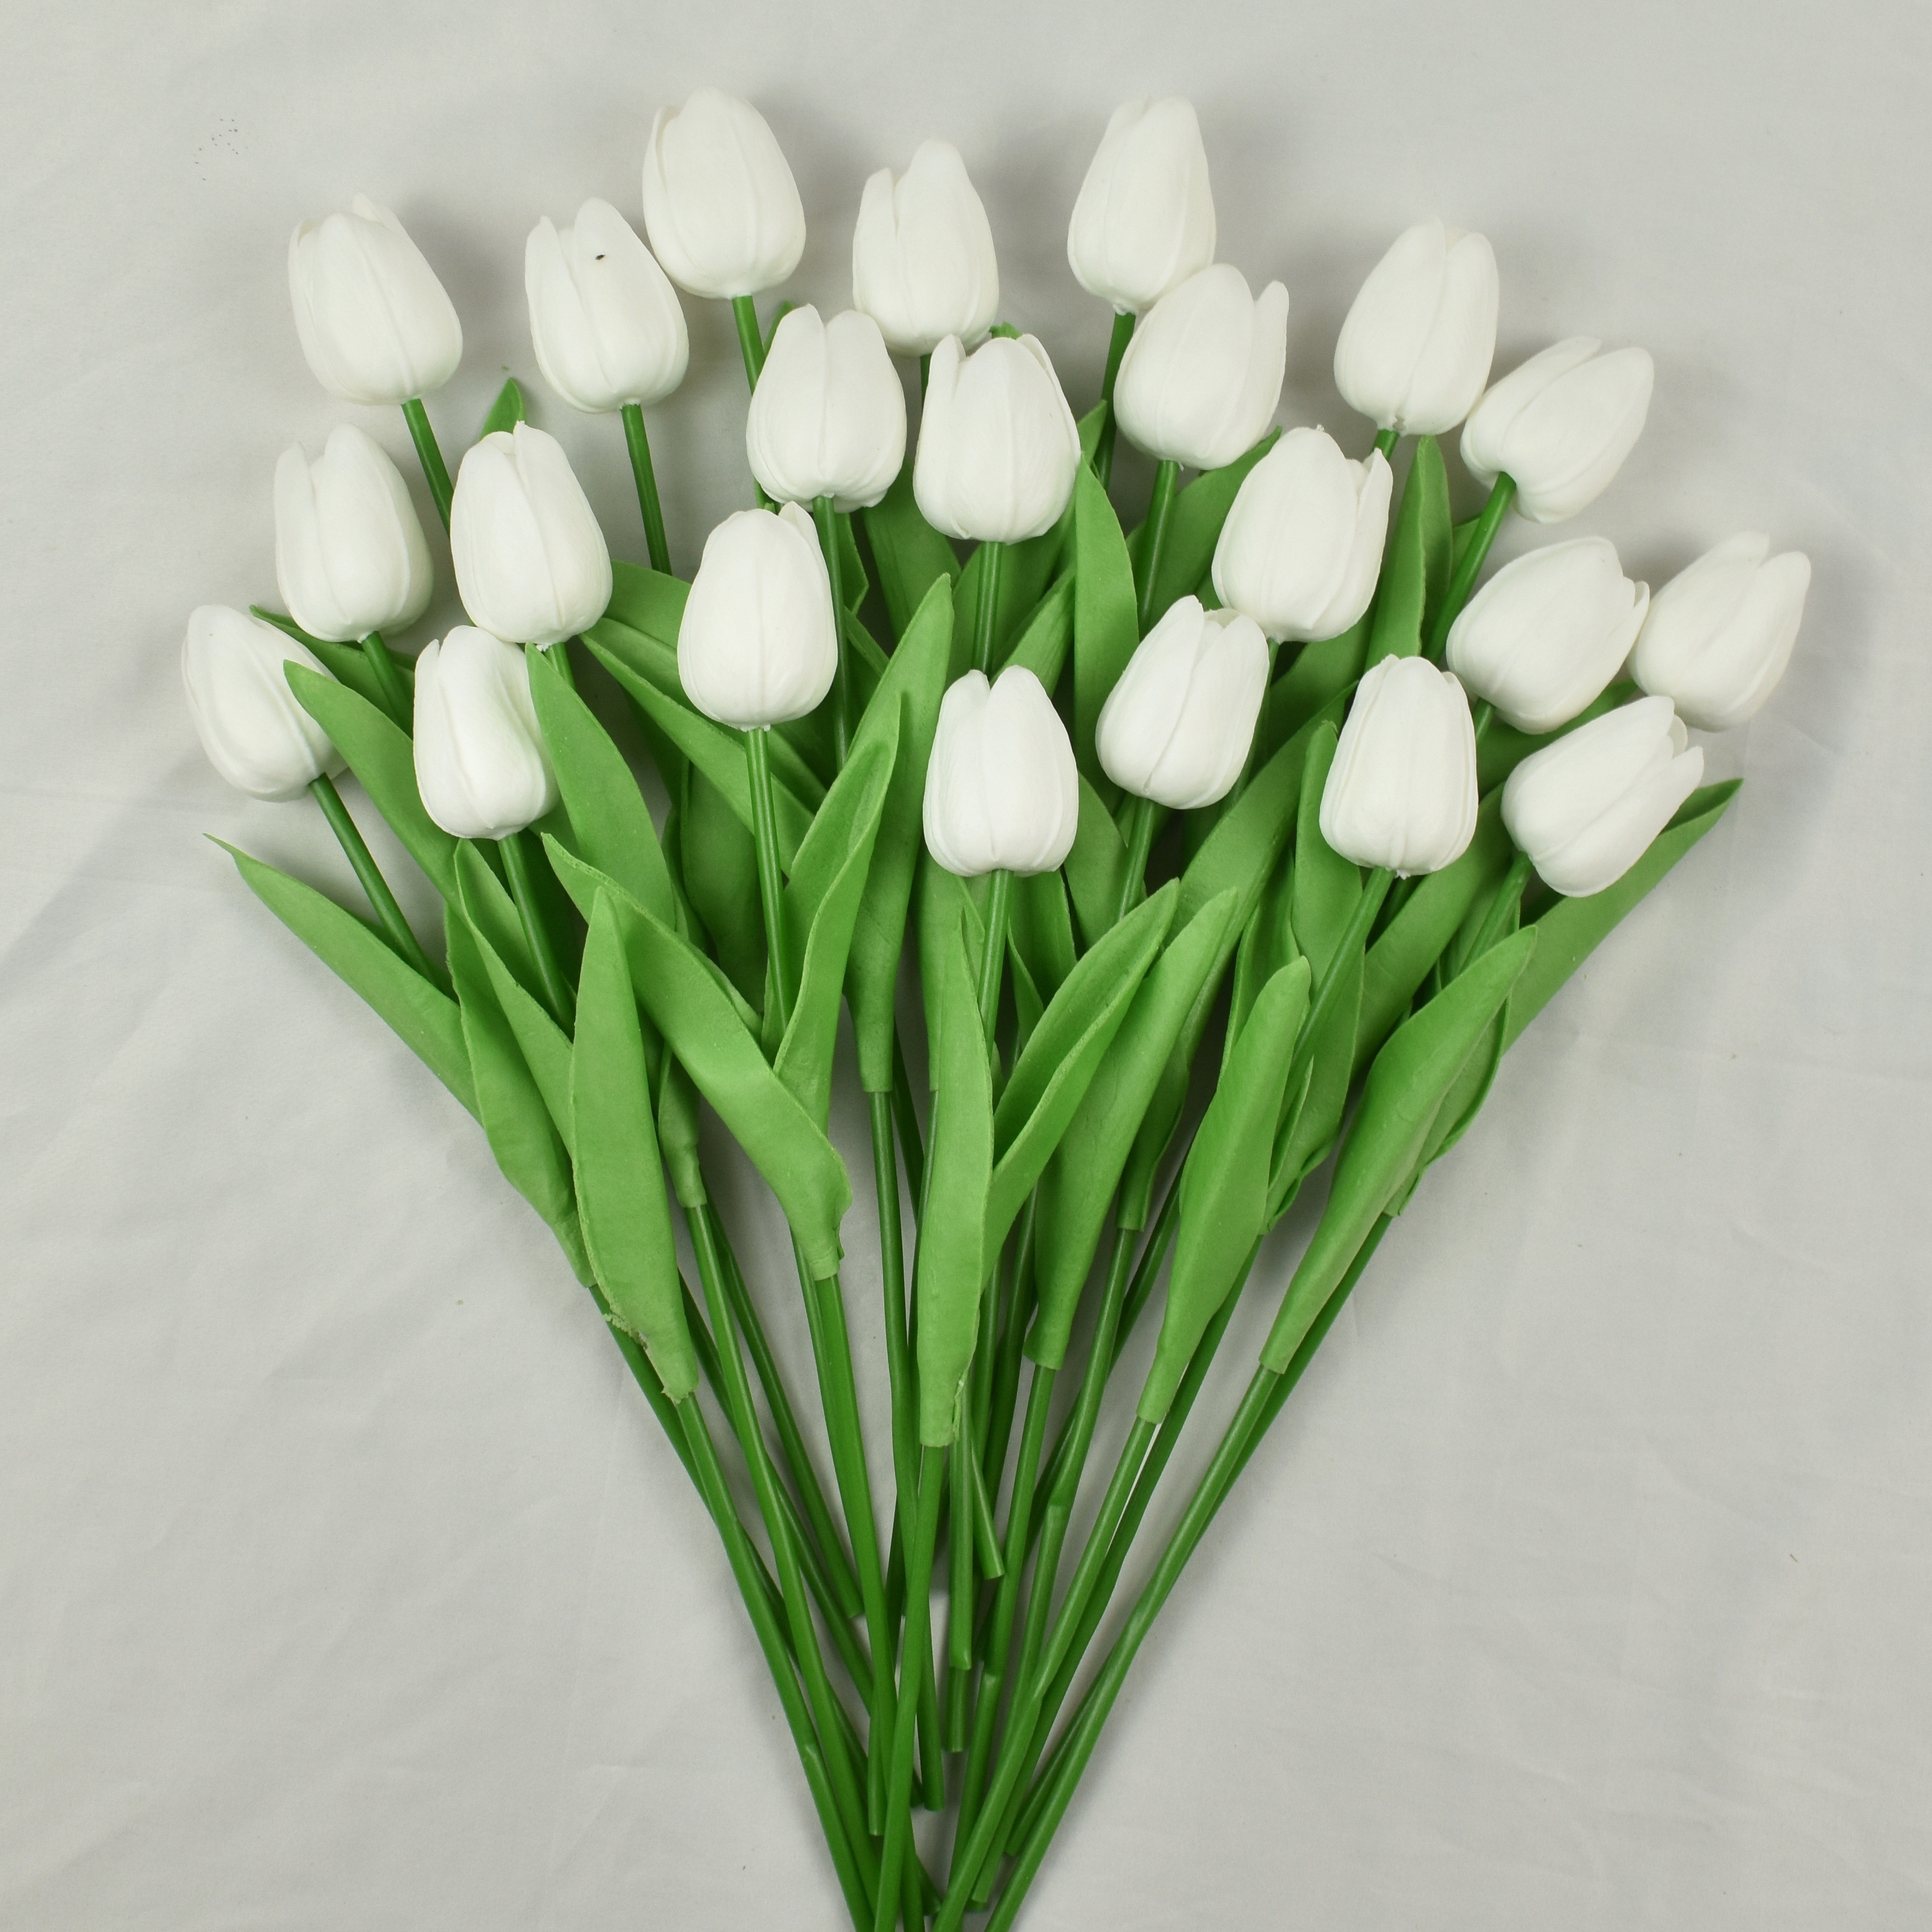 20 Pcs Multicolor Tulips Artificial Flowers Faux Tulip Stems Real Feel PU Tulips for Easter Spring Wreath Wedding Bouquet Centerpiece Floral